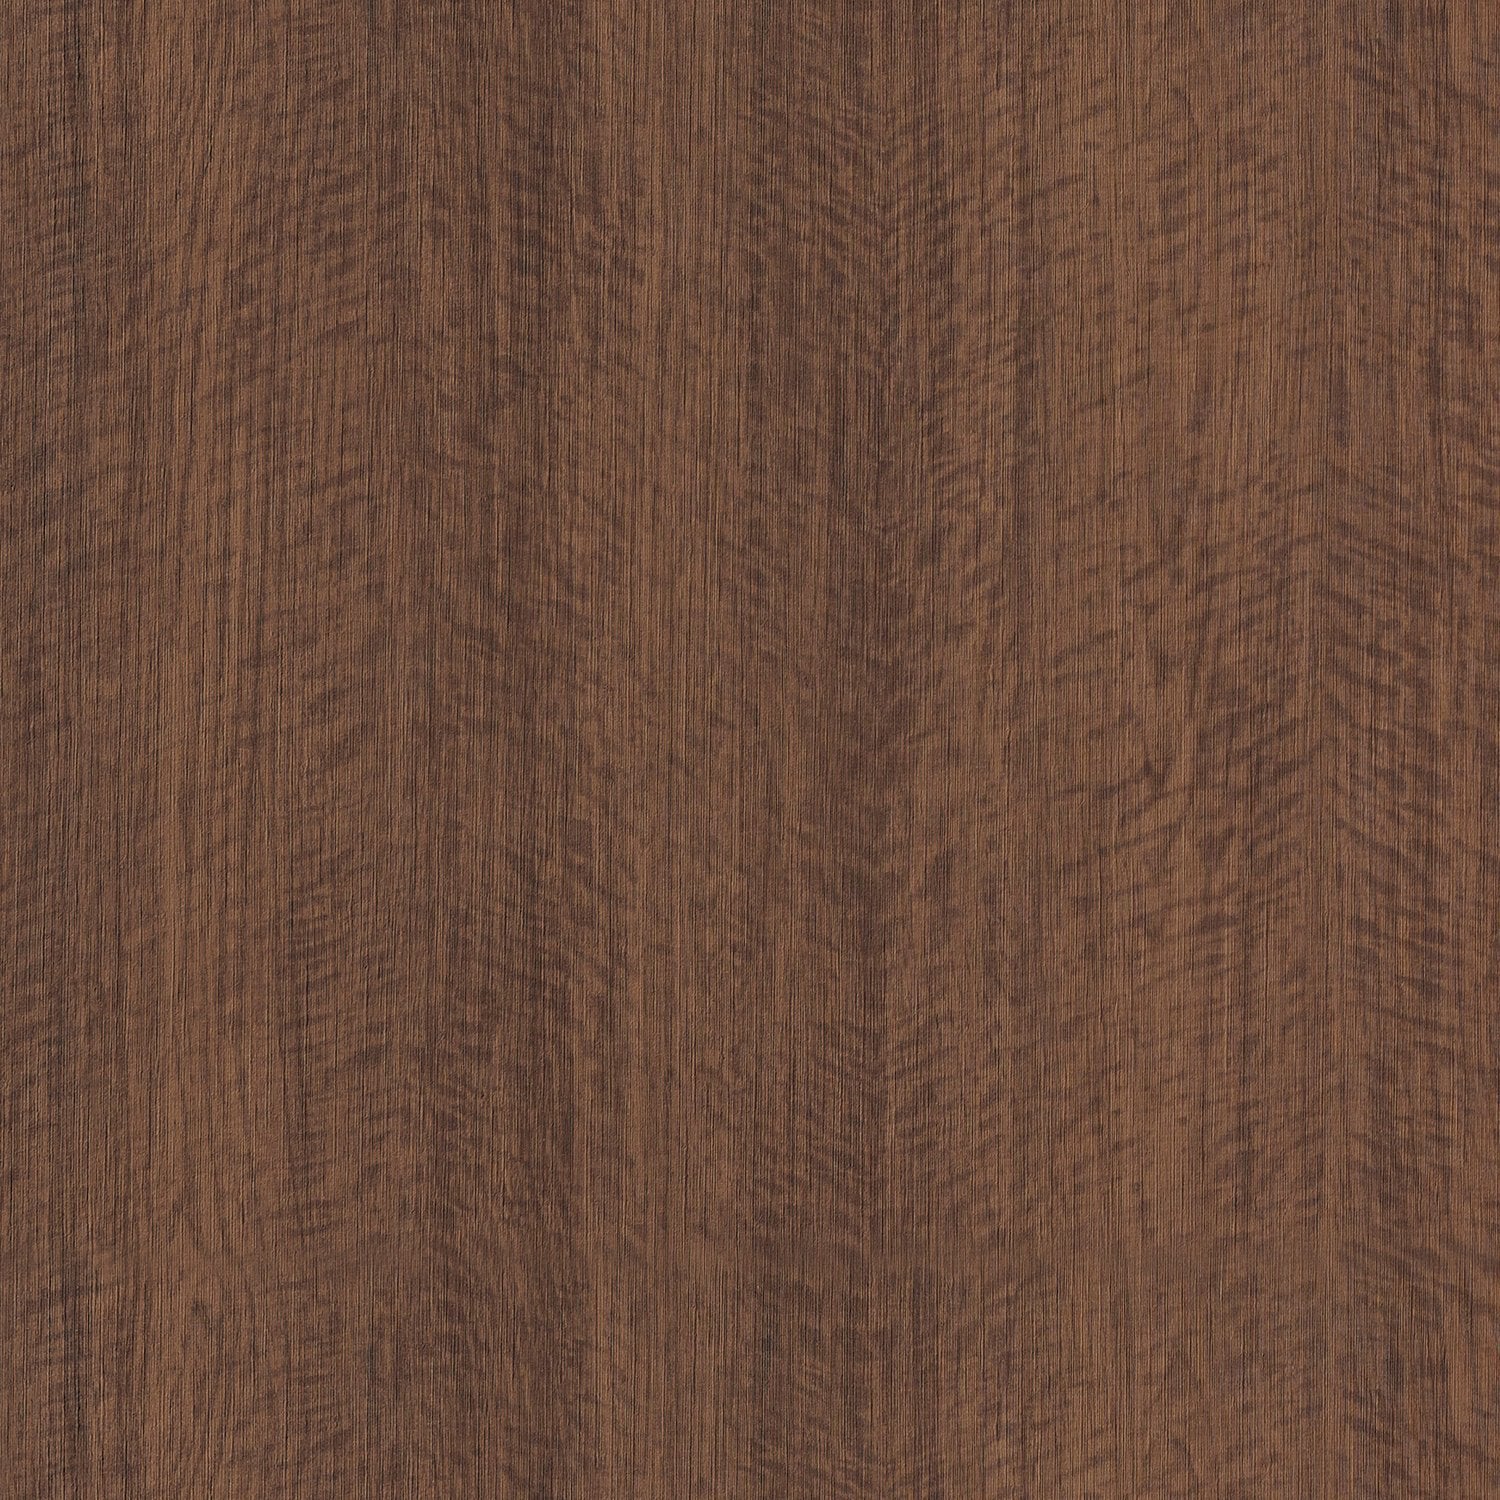 Woodn't It Be Nice - Y47880 - Wallcovering - Vycon - Kube Contract